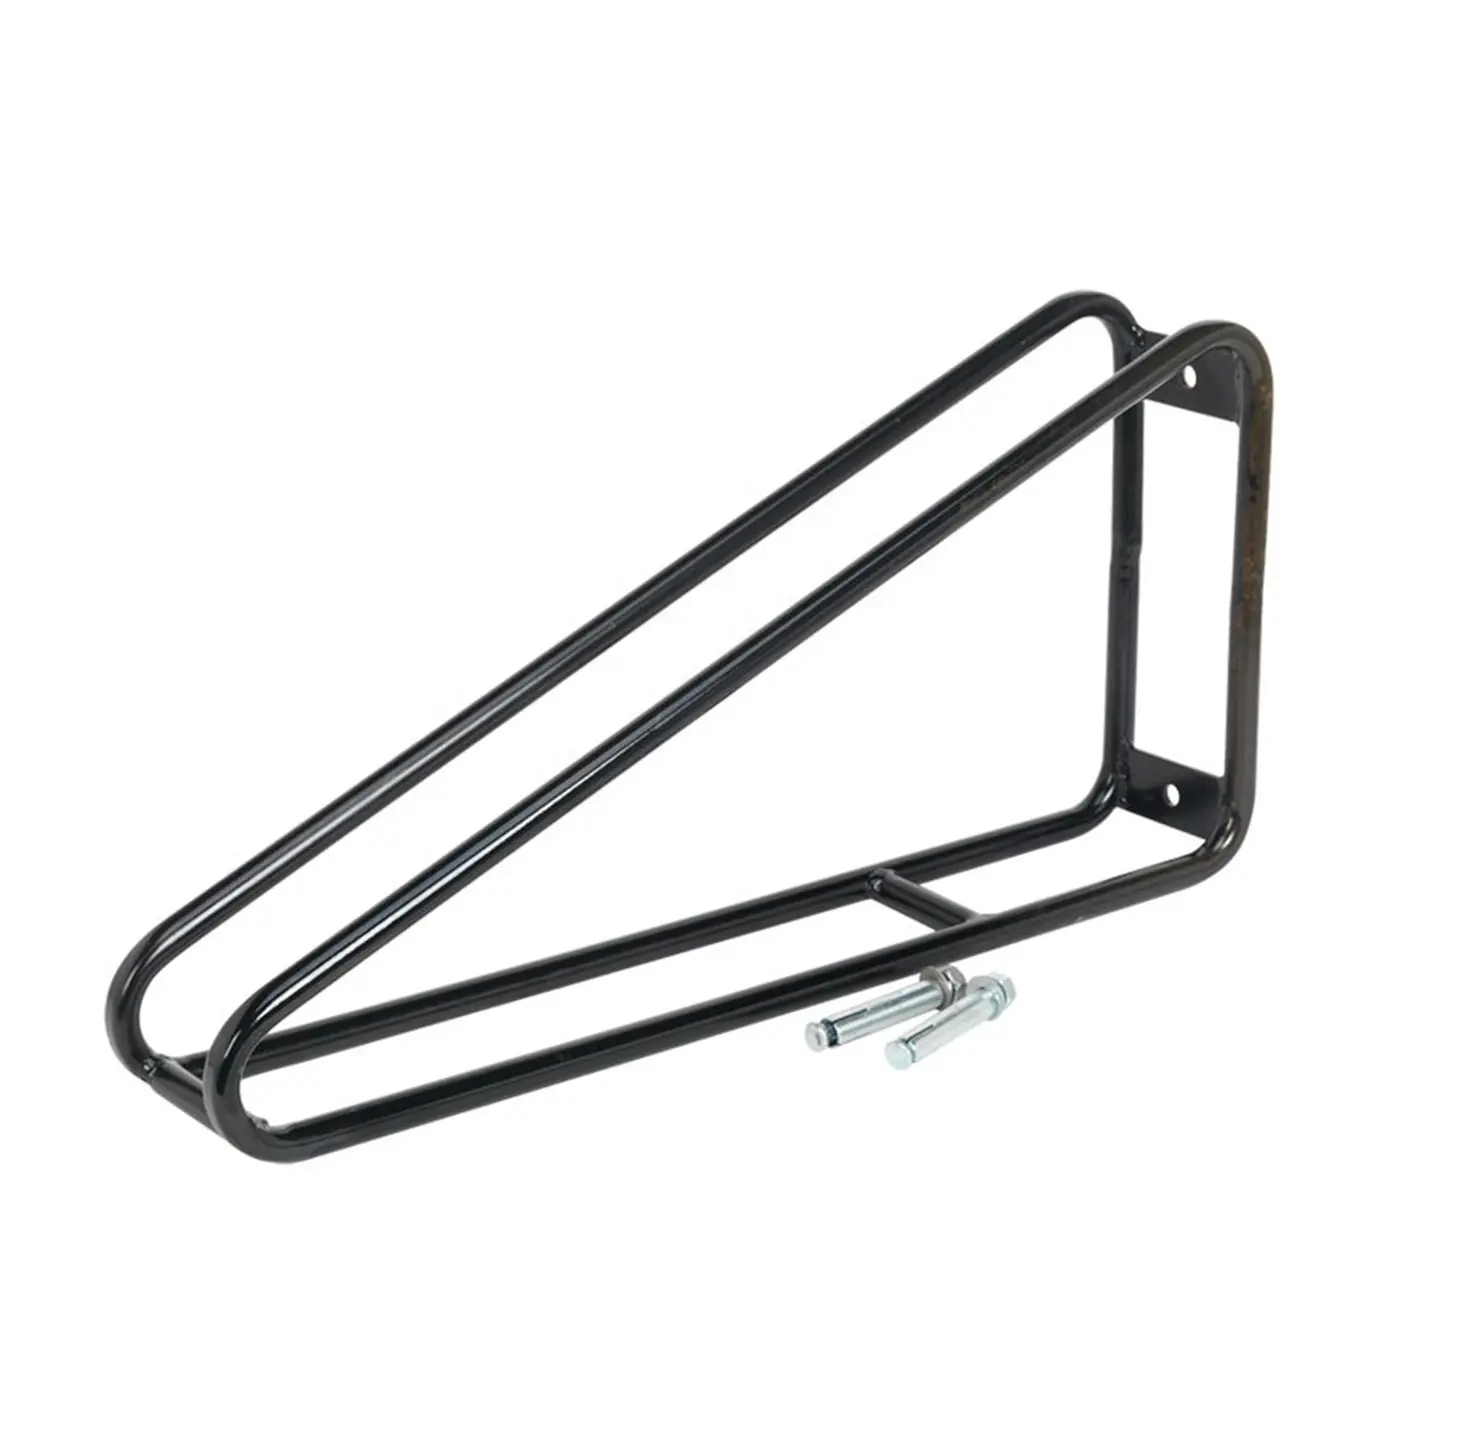 Hot Sale Bicycle Rack Bike Parking Stand With Professional Quality Wall Mounted Bike Stand Storage Rack